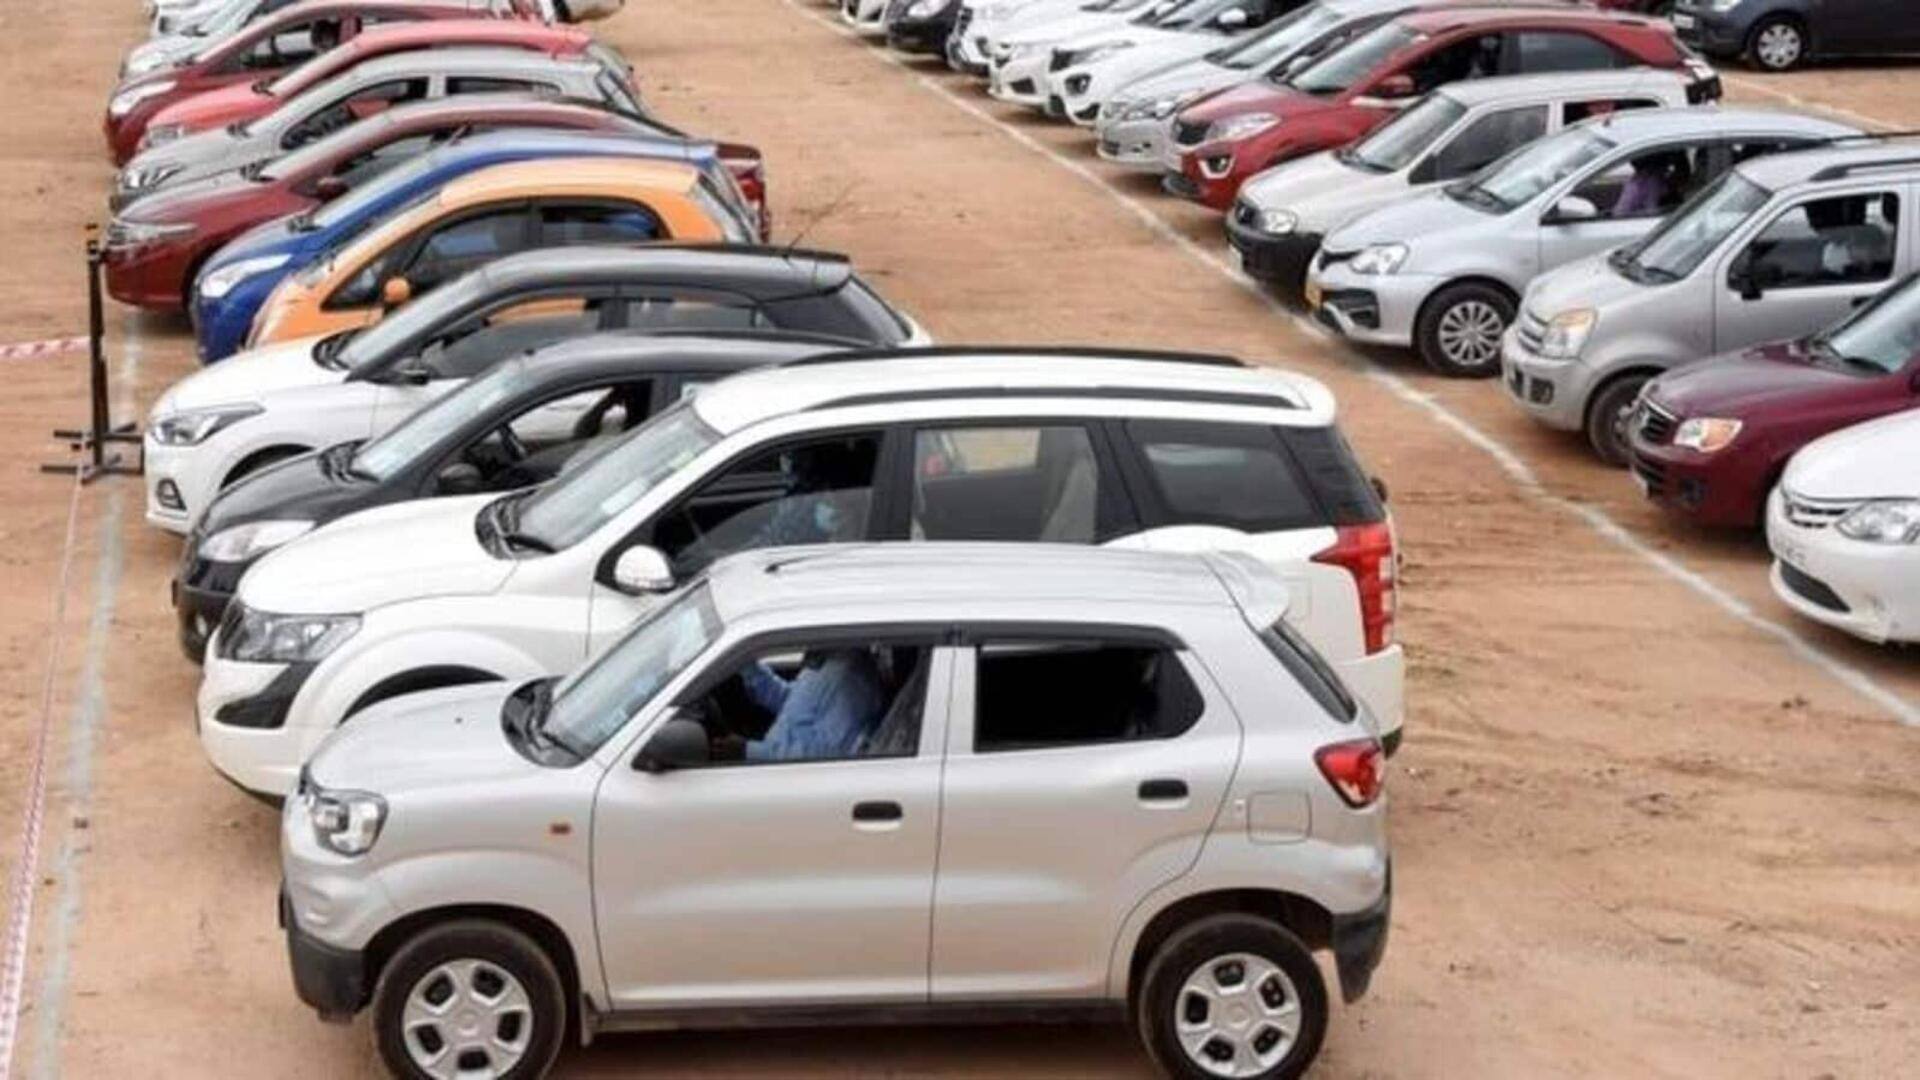 Passenger vehicle ASP in India rose 50% in 5 years